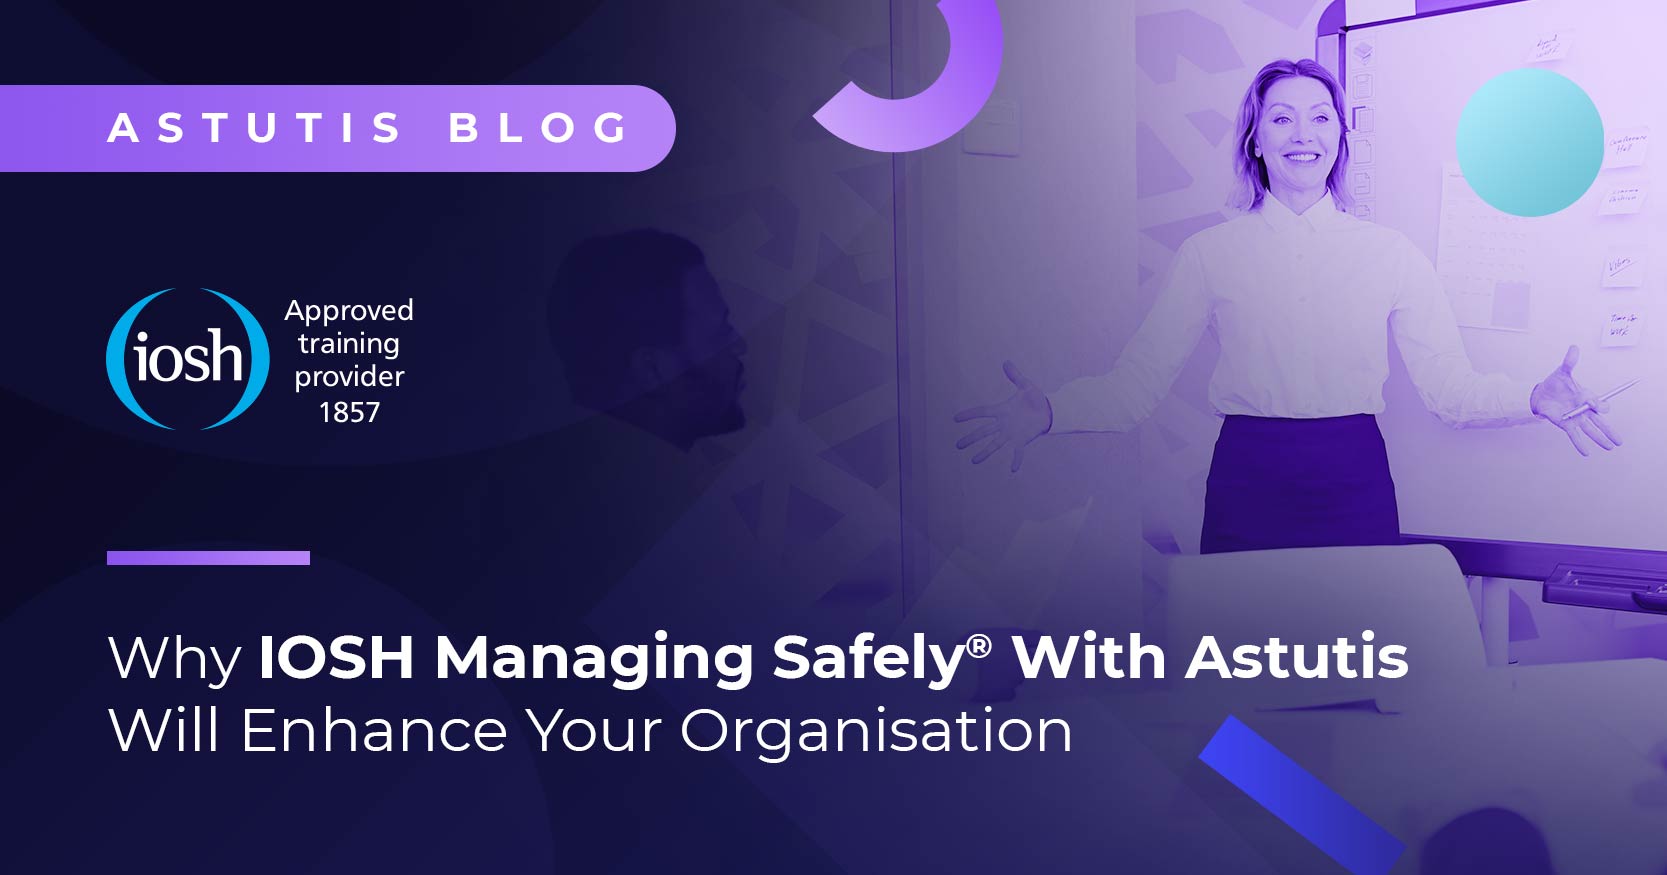 Why Your Organisation Needs the IOSH Managing Safely Course? Image